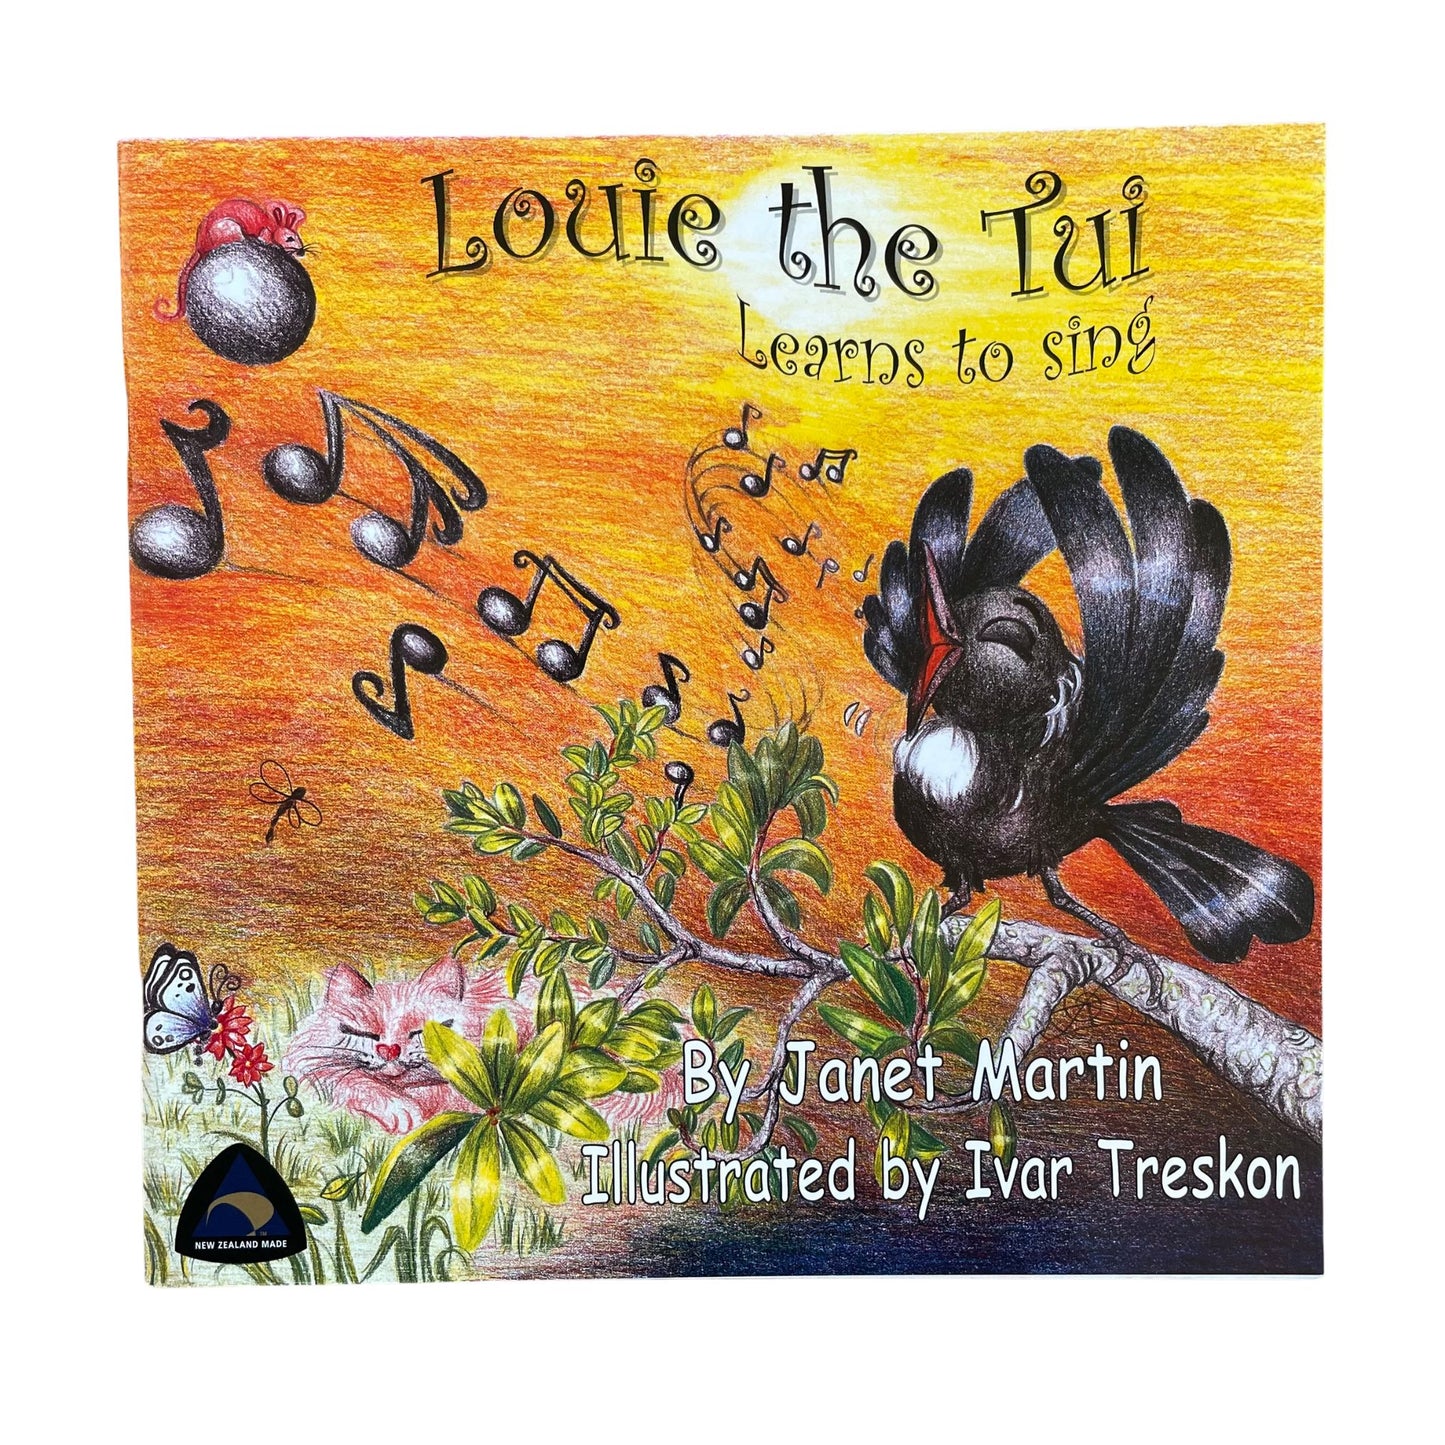 Louie the Tui Learns to Sing - Soft Cover Children's reading book.